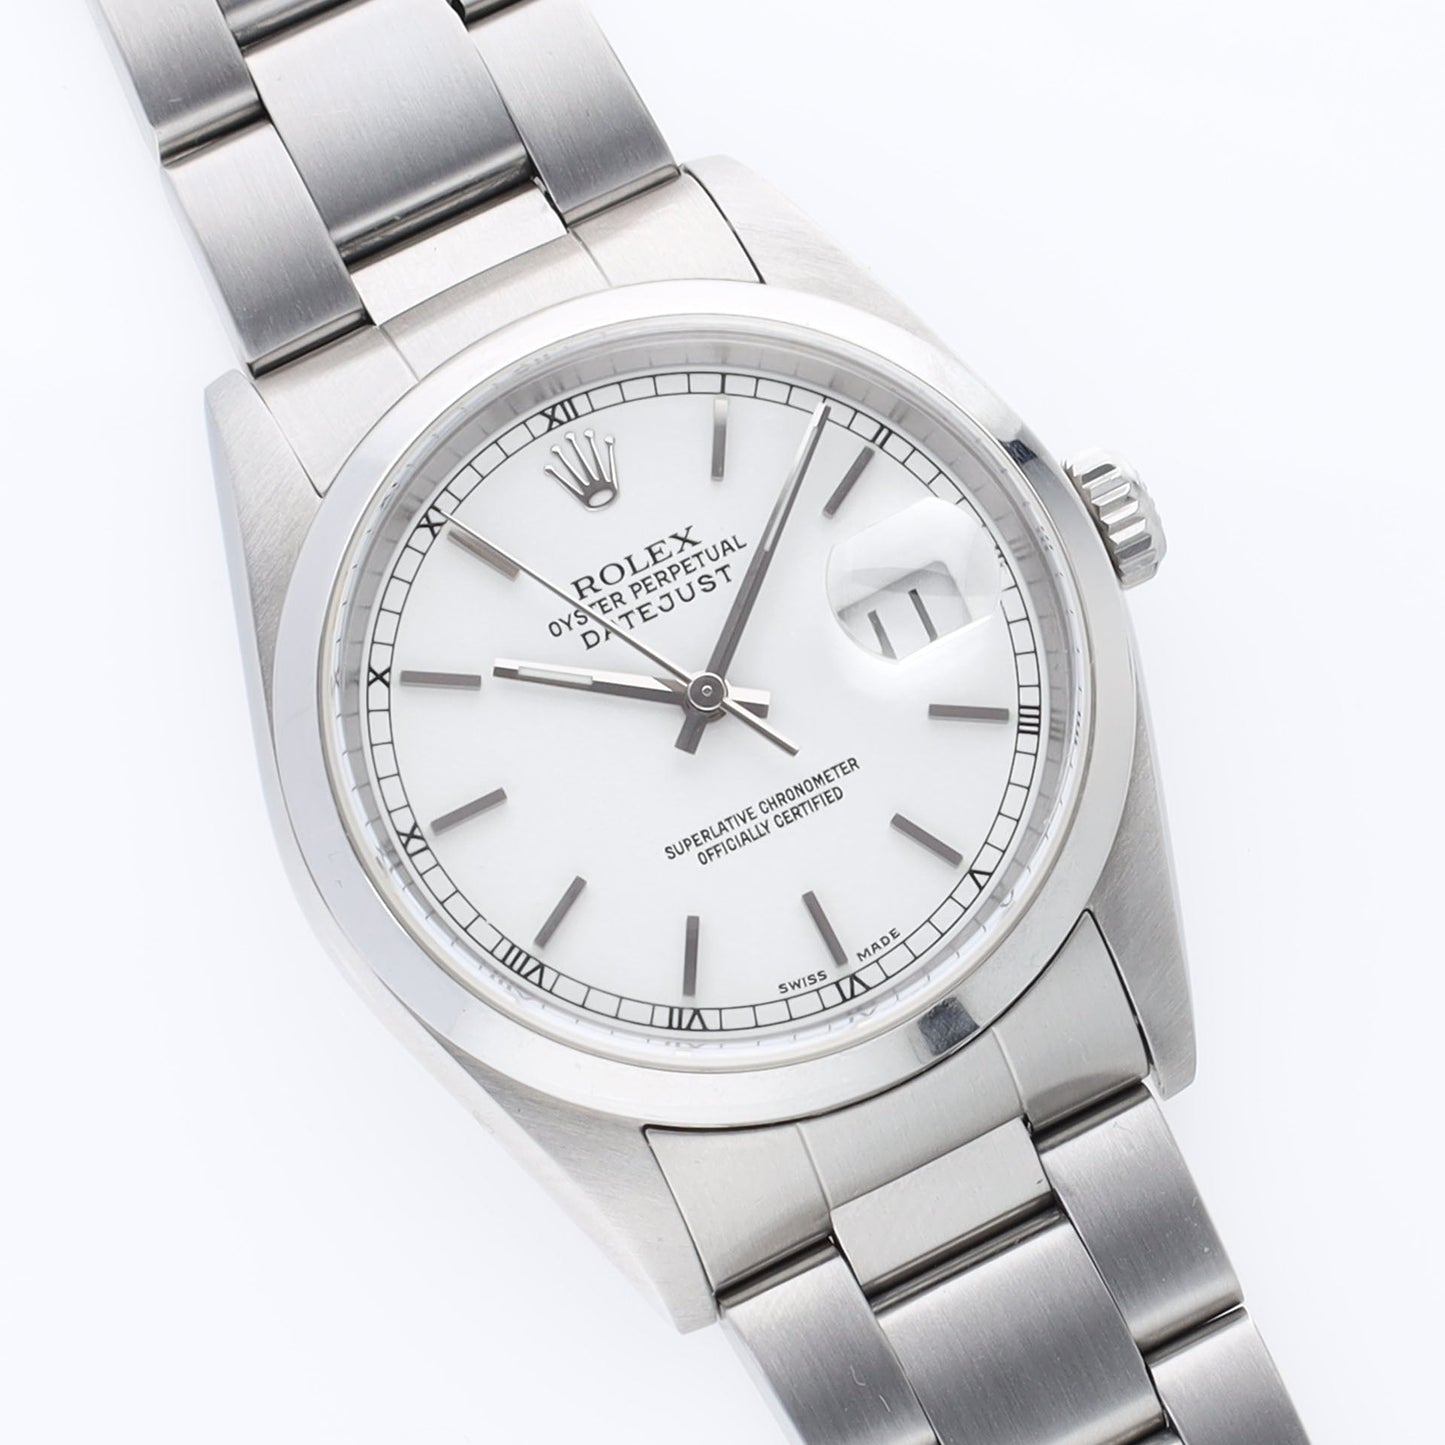 Rolex Datejust 16200 White Dial With Rolex Guarantee Paper